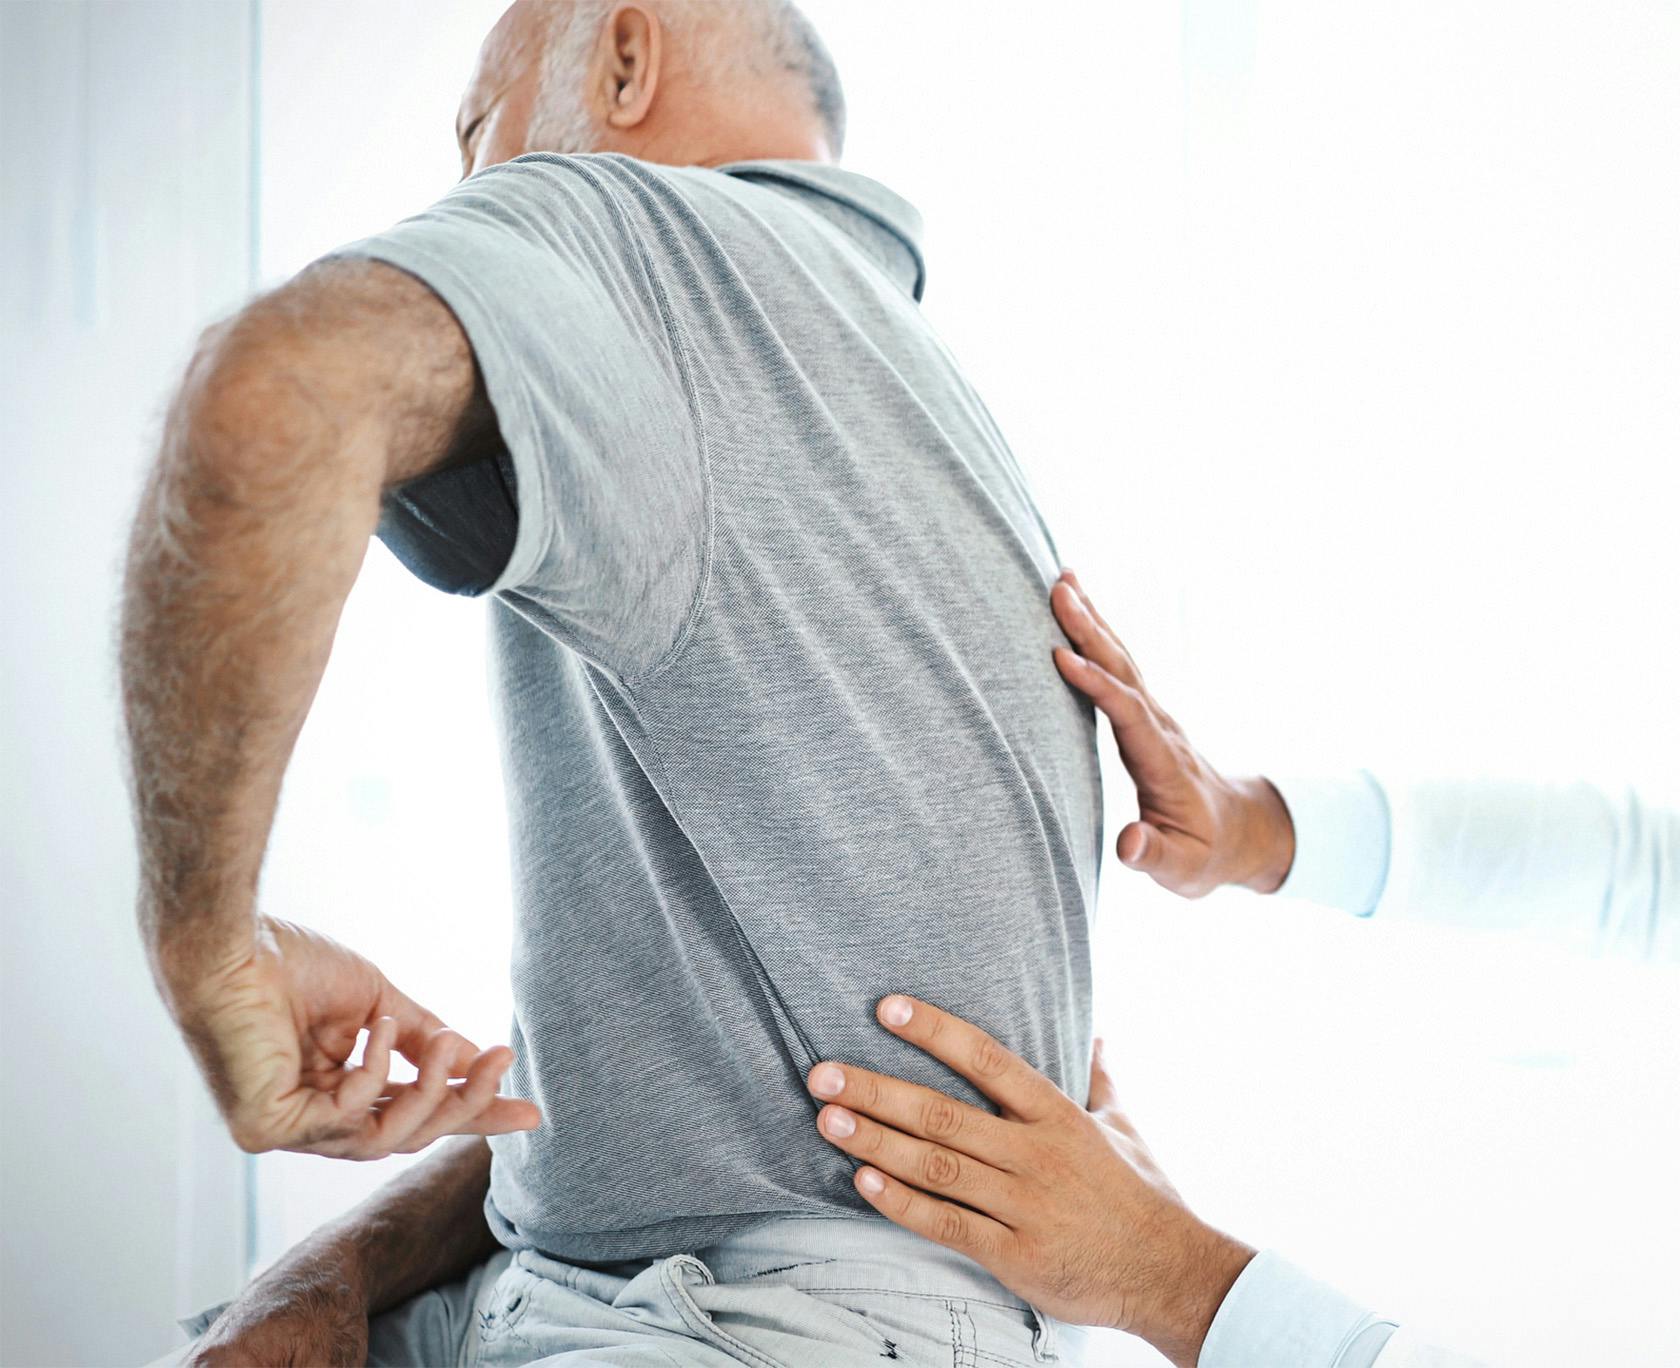 Man getting his lower back checked by a doctor